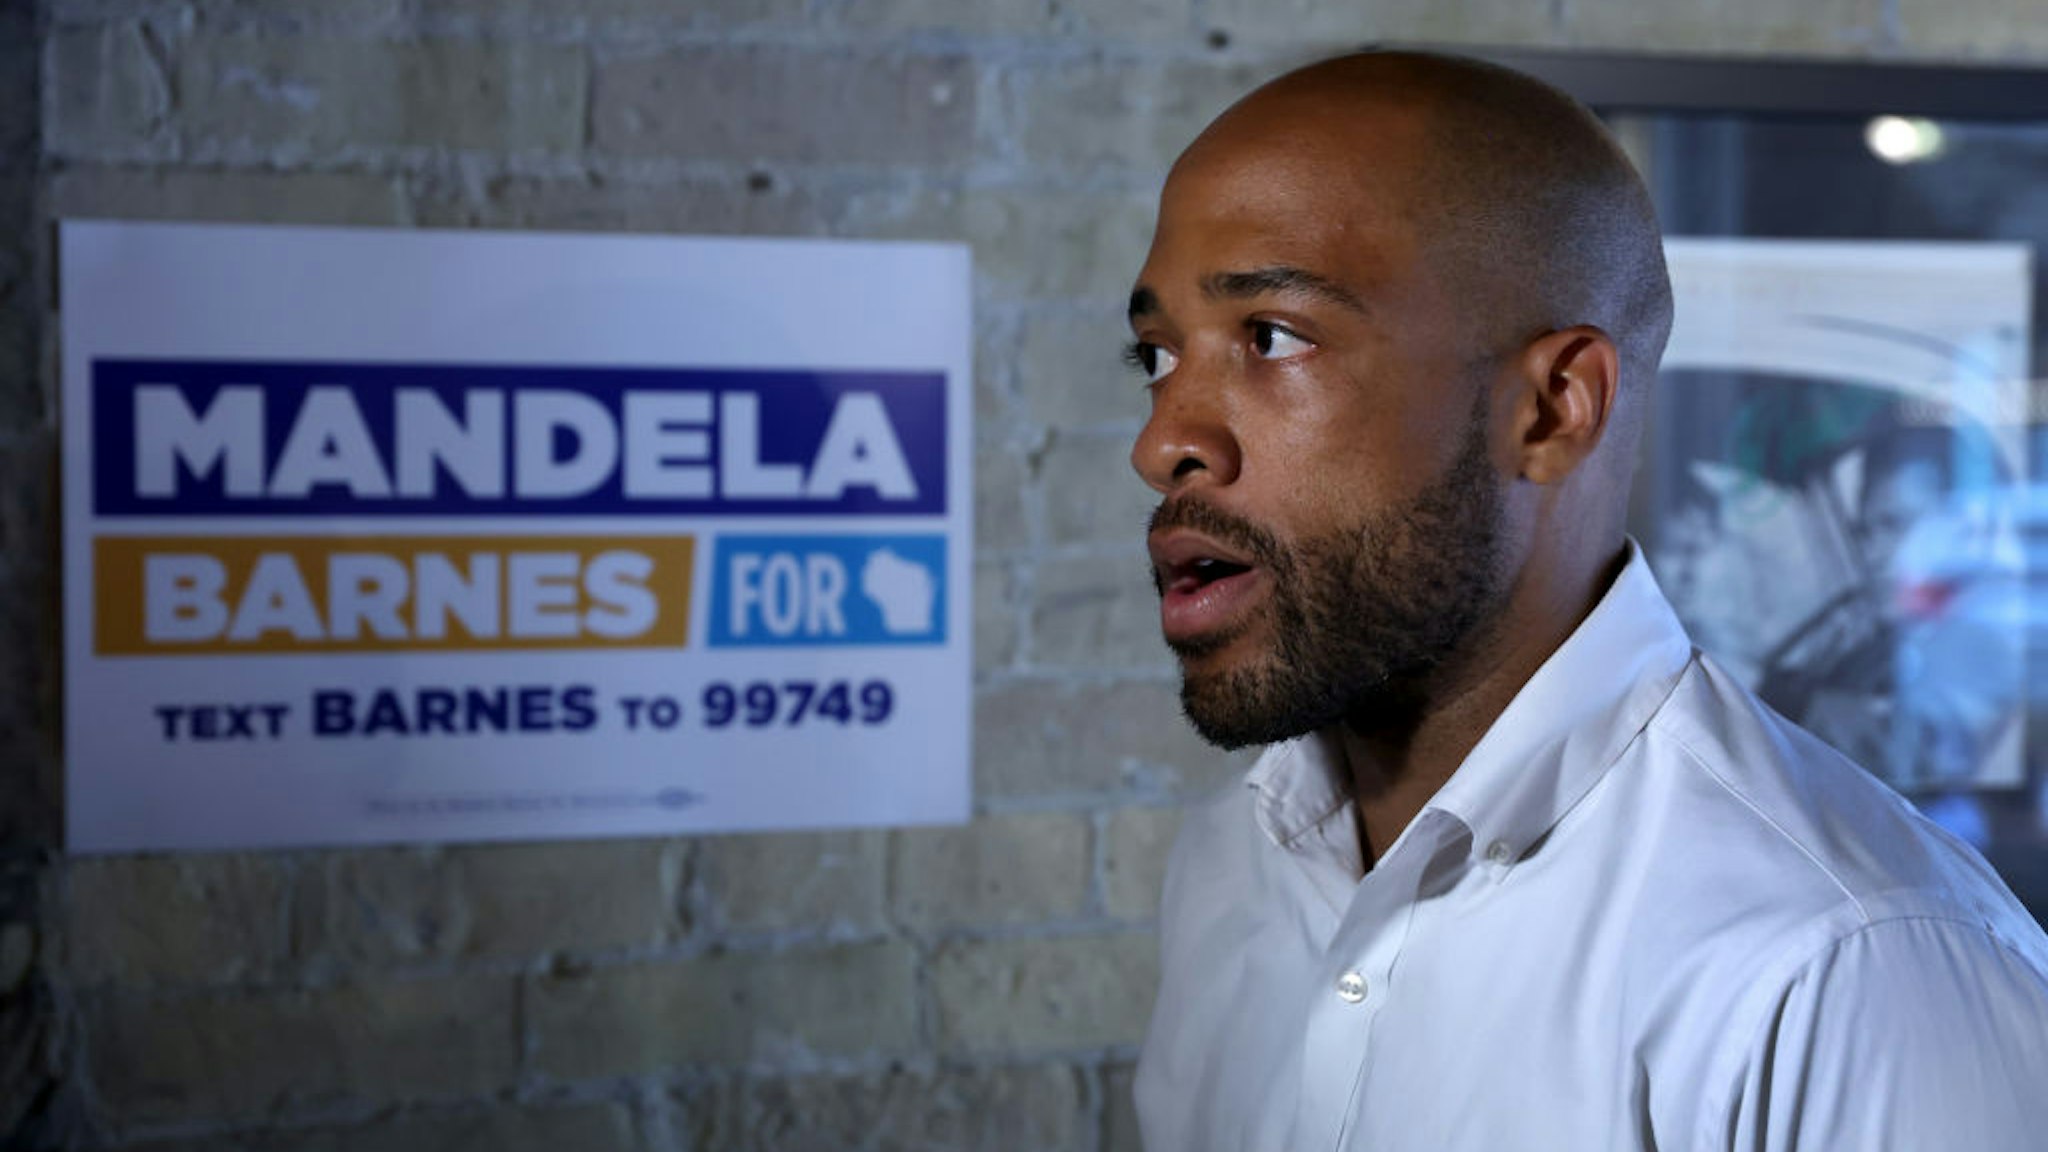 MILWAUKEE, WISCONSIN - AUGUST 07: Wisconsin Lieutenant Governor Mandela Barnes who is running to become the Democratic nominee for the U.S. senate speaks to reporters following a campaign event at The Wicked Hop on August 07, 2022 in Milwaukee, Wisconsin. Barnes is expected to win the primary on Tuesday and face incumbent GOP Senator Ron Johnson in the general election in November.